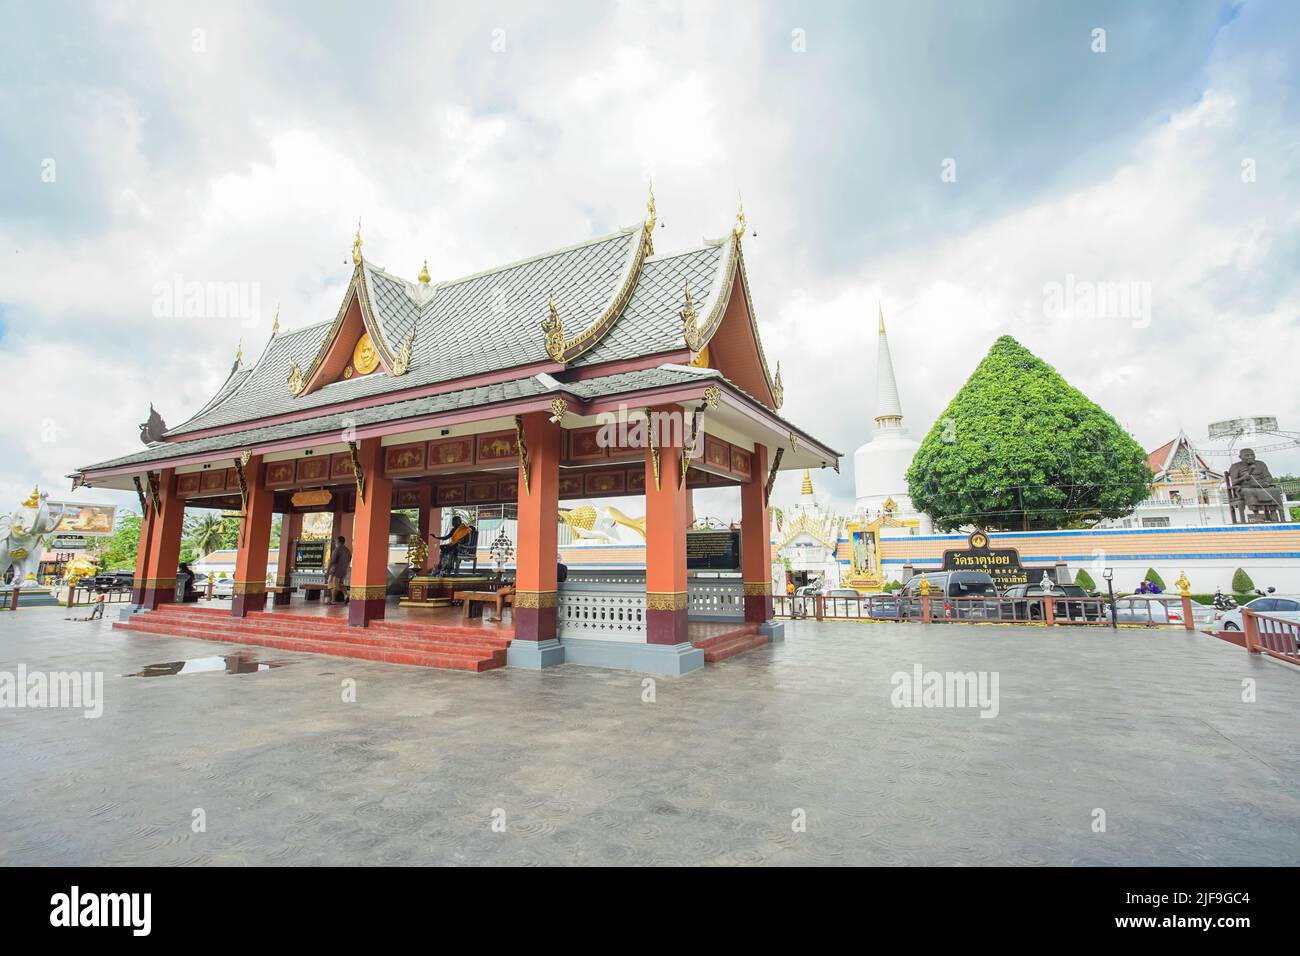 Nakhon Si Thammarat Province, THAILAND - June 26, 2022: Scenery of The famous temple named Wat That Noi in Nakhon Si Thammarat, Thailand. This temple Stock Photo